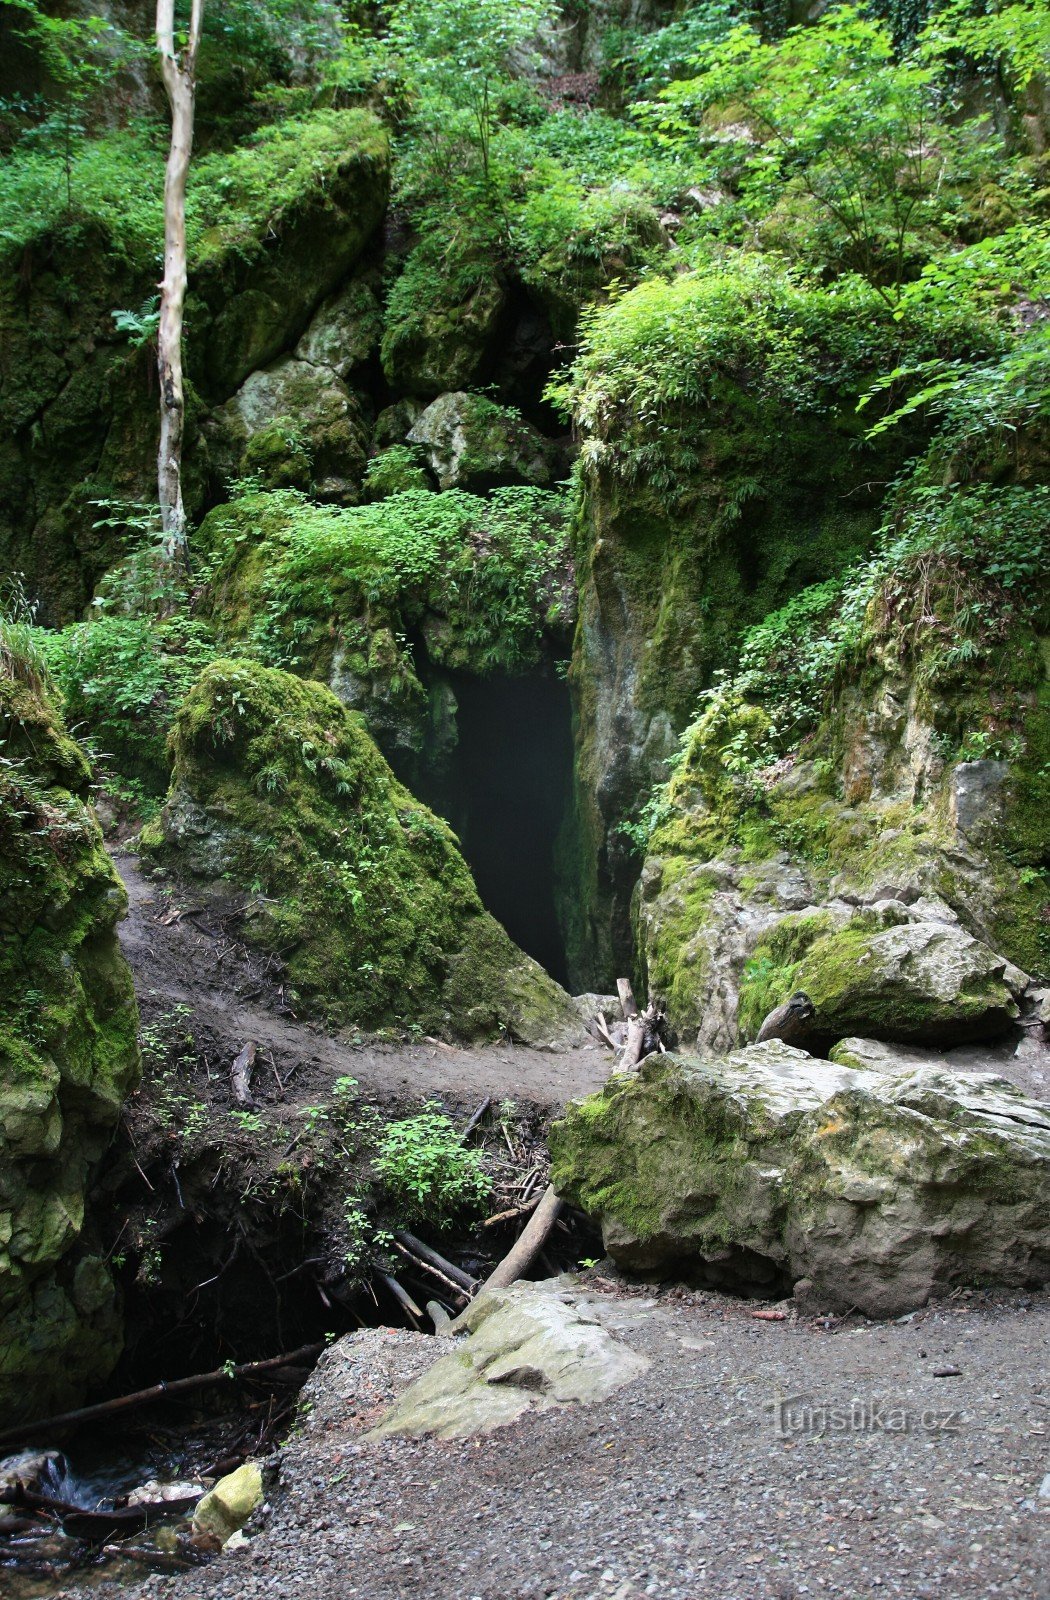 Rudice sinkhole - the place where the Jedovnické stream sinks into the cave system - Rudice